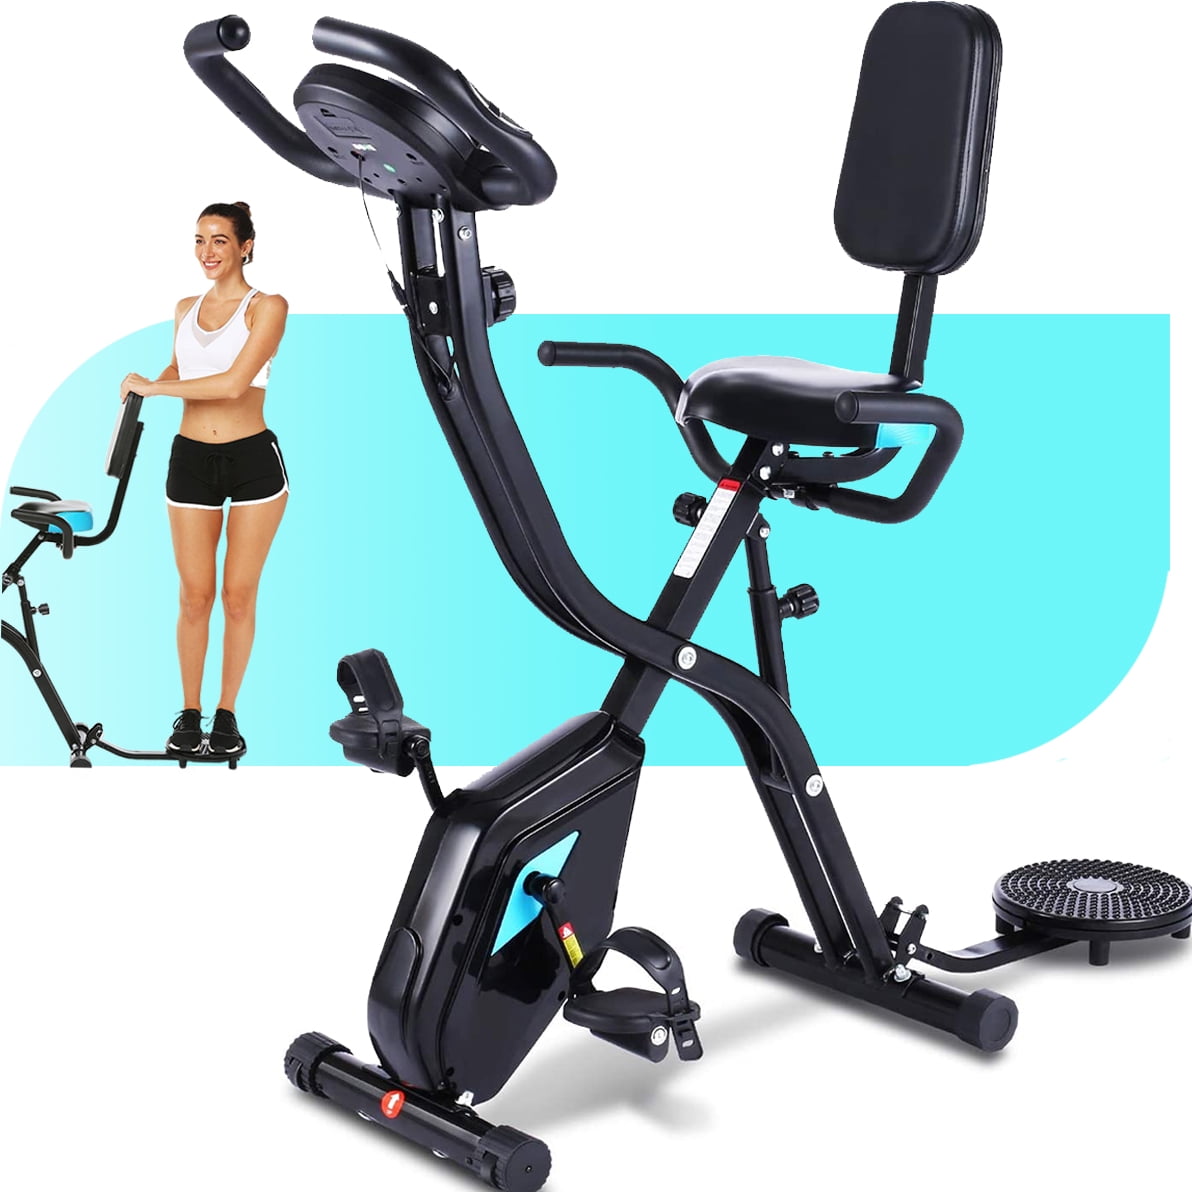 ANCHEER Indoor Exercise Slim Folding Bike 3 in1 Home Stationary Magnetic Cycle. 